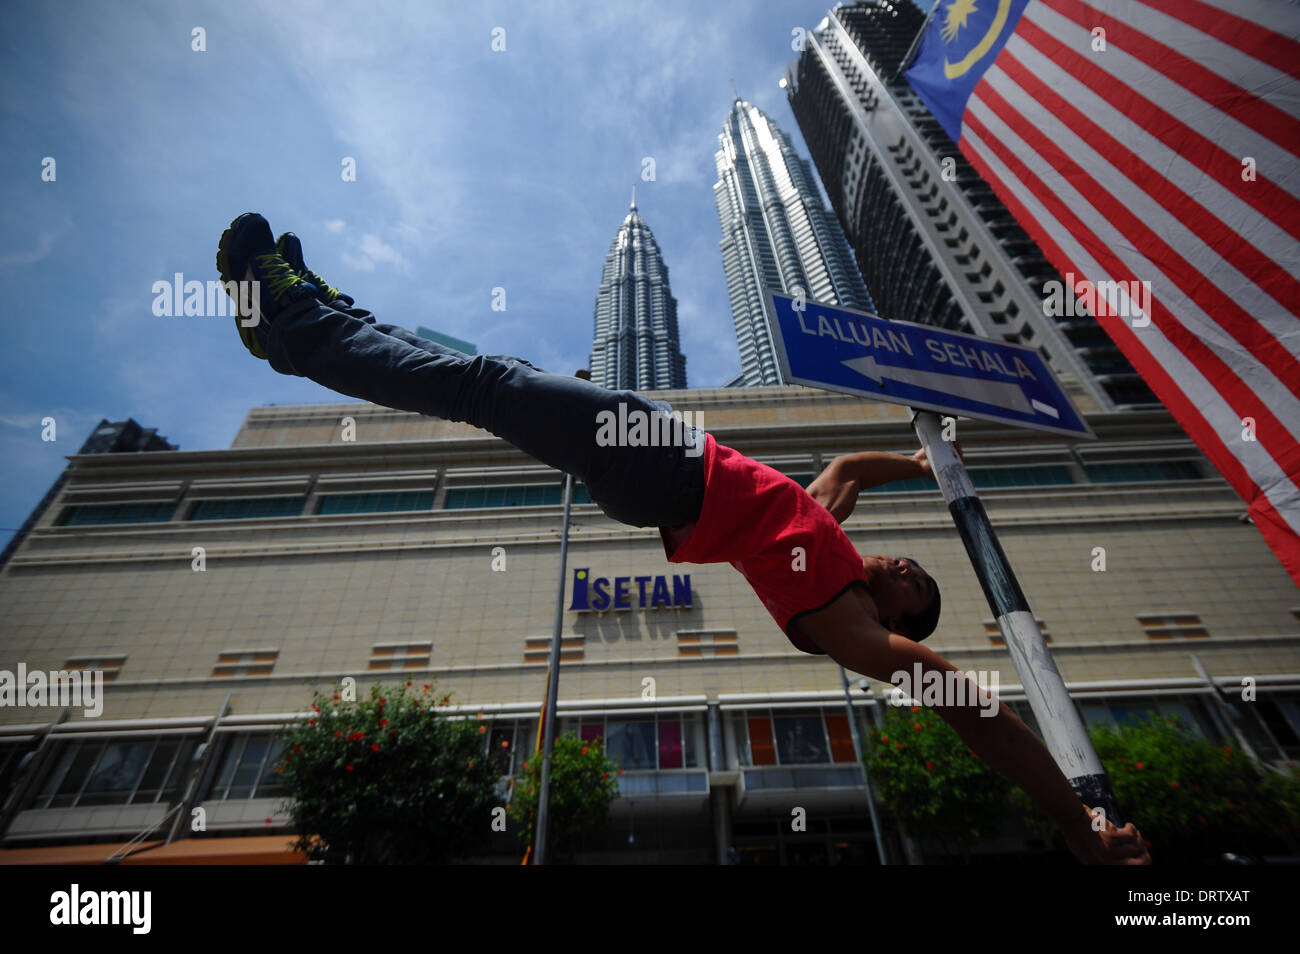 Kuala Lumpur, Malaysia. 1st Feb, 2014. A man does a flag stand in front of Kuala Lumpur Twin Towers on the second day of Chinese Lunar New Year in Kuala Lumpur, Malaysia, Saturday, February 1, 2014. In Malaysia, during religious festivities there is usually two days public holiday, which other ethnic races will enjoy the holidays. © Joshua Paul/NurPhoto/ZUMAPRESS.com/Alamy Live News Stock Photo